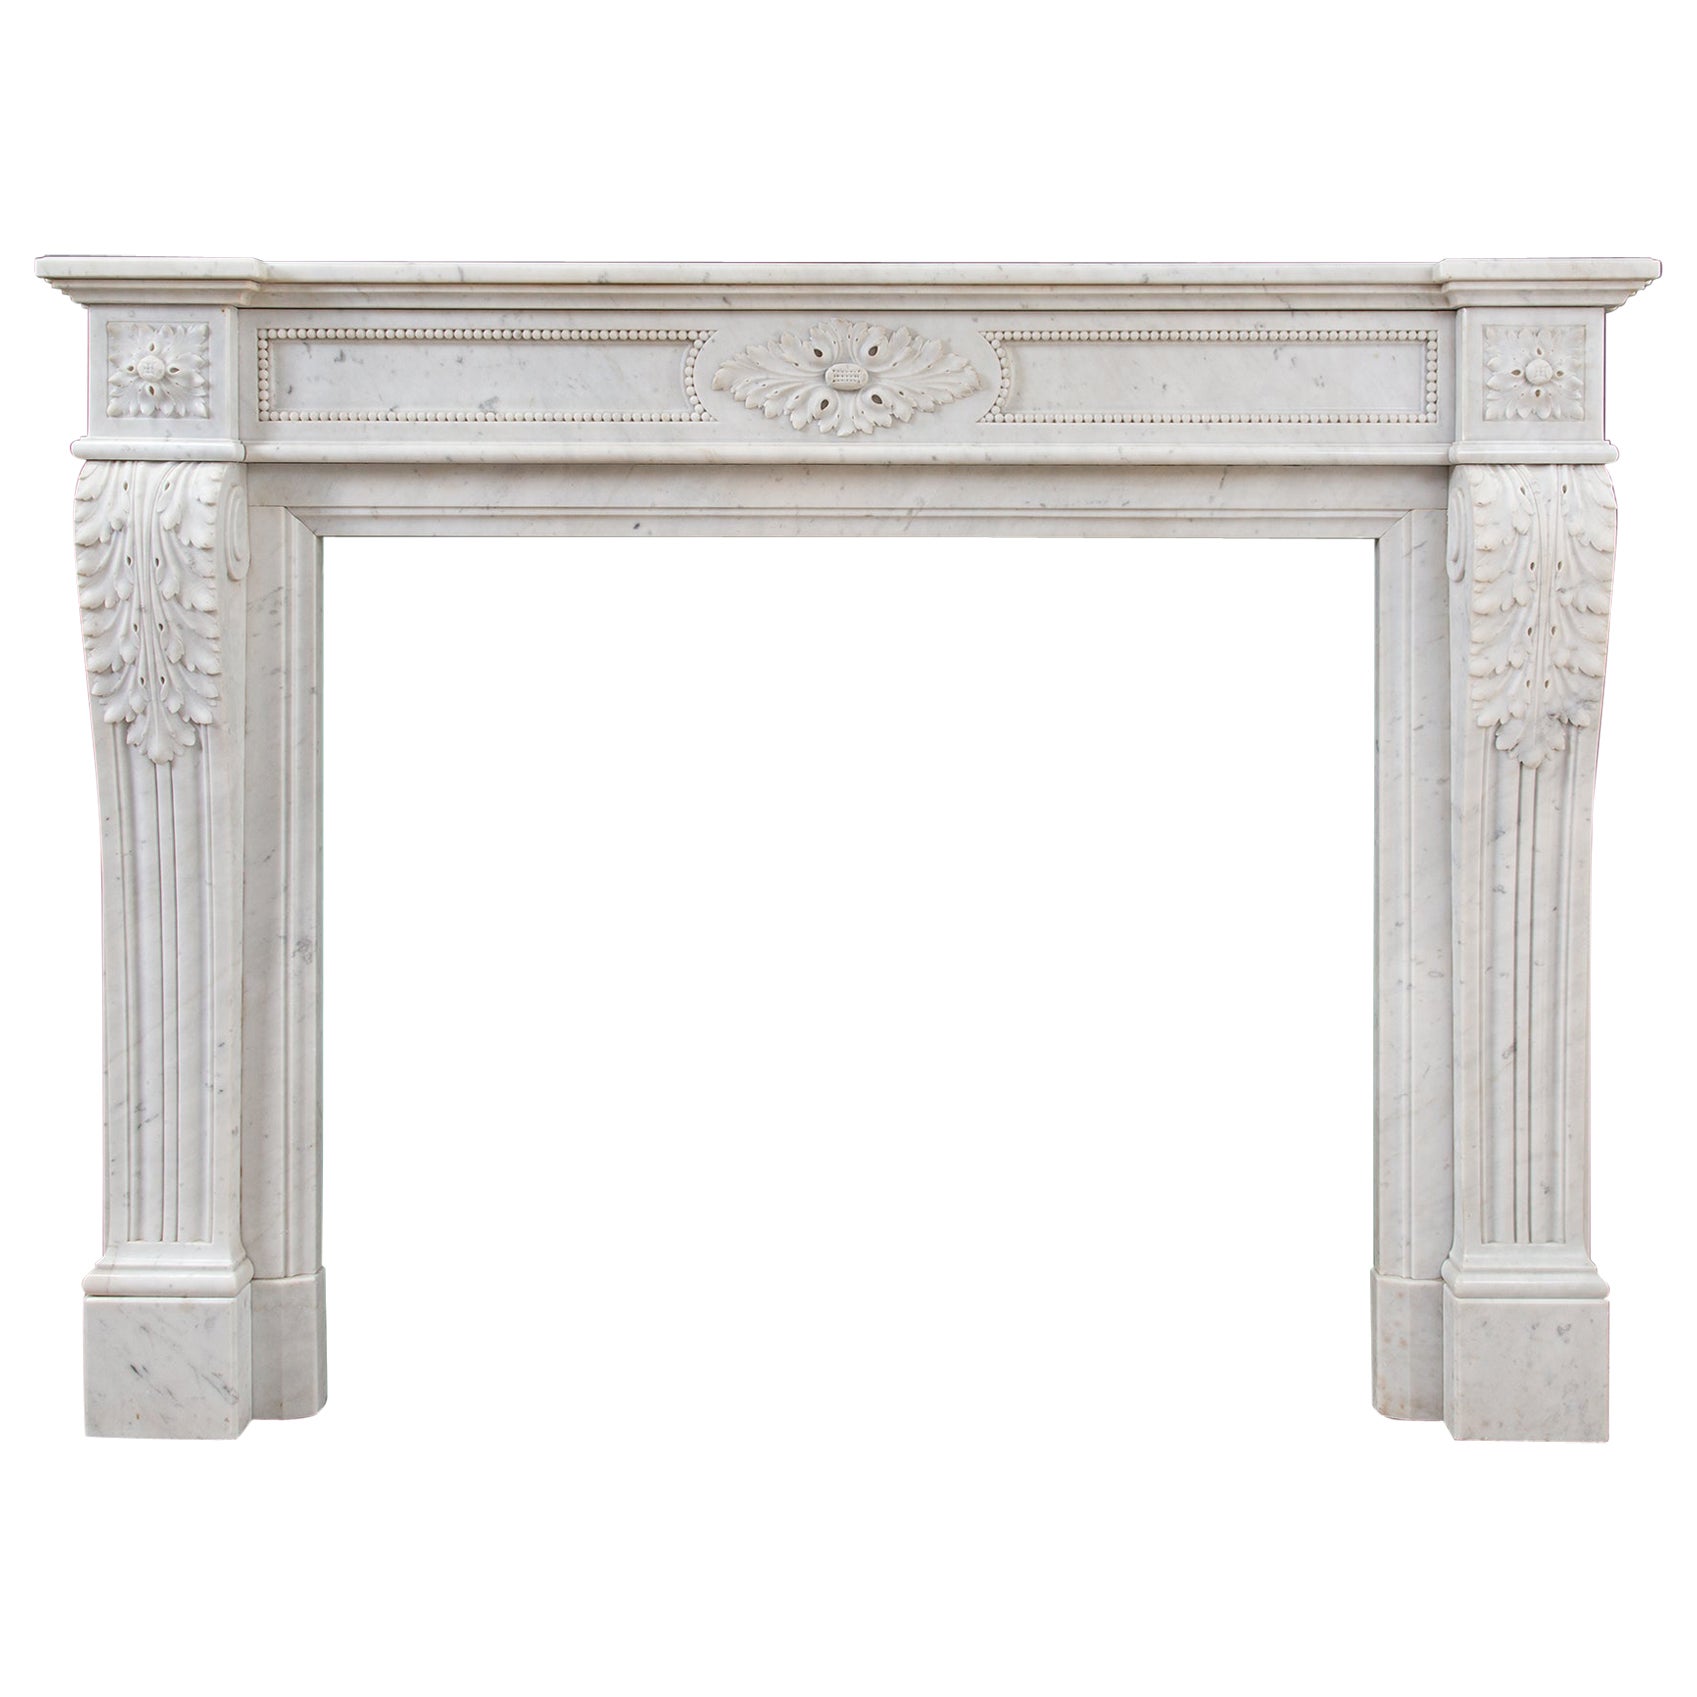 Beautiful French Louis XV Style Carrara Marble Fireplace Surround For Sale